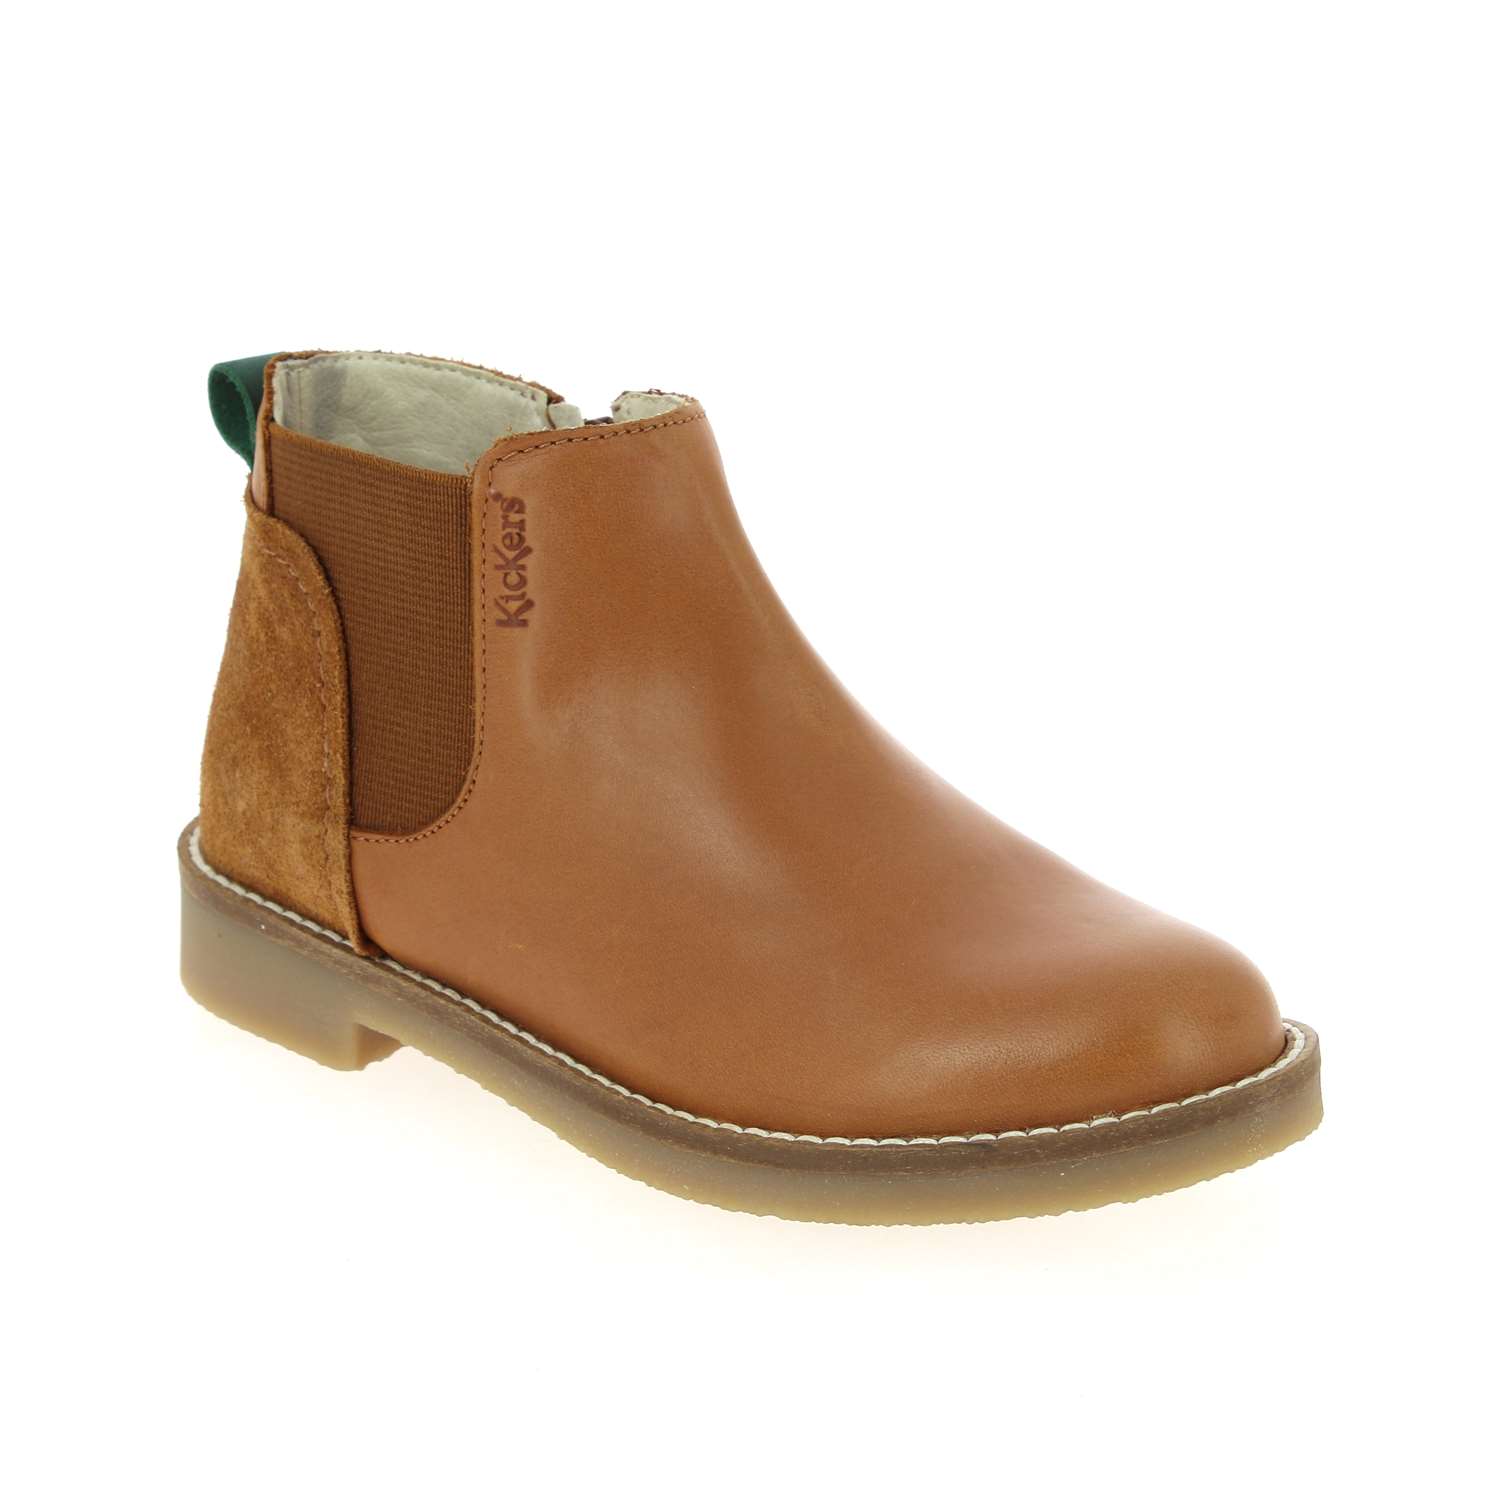 01 - NYCCO - KICKERS - Boots et bottines - Cuir